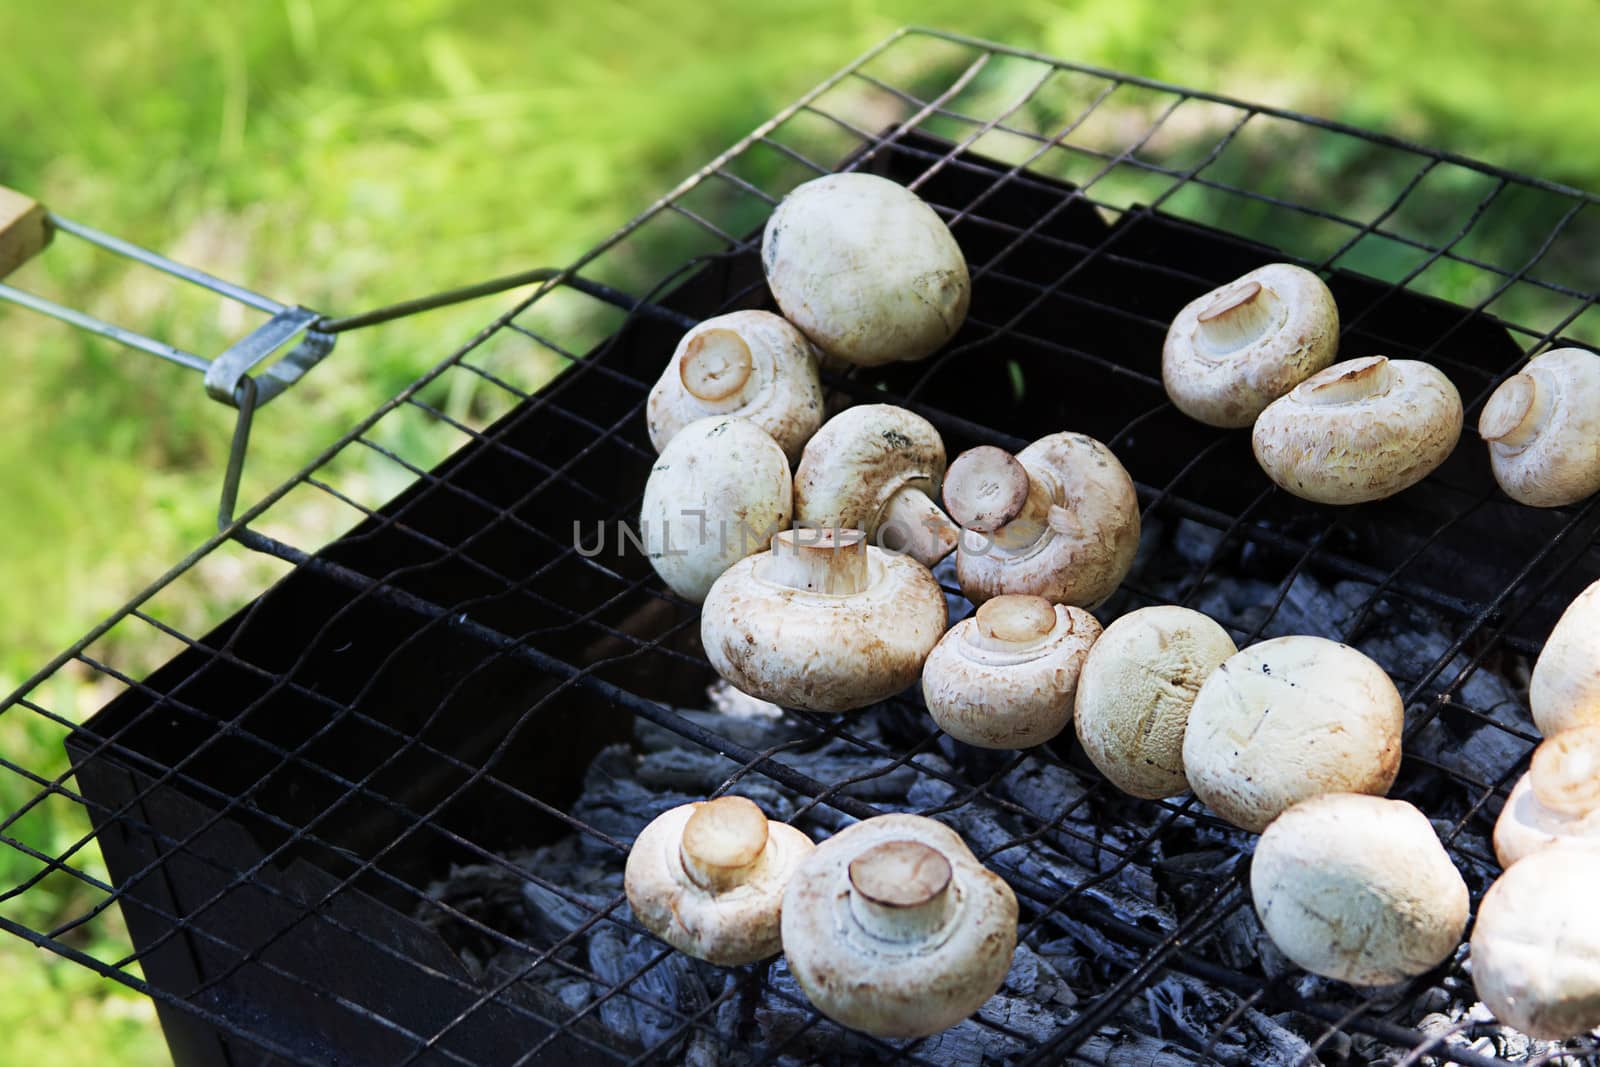 Some champignon mushrooms on the grill